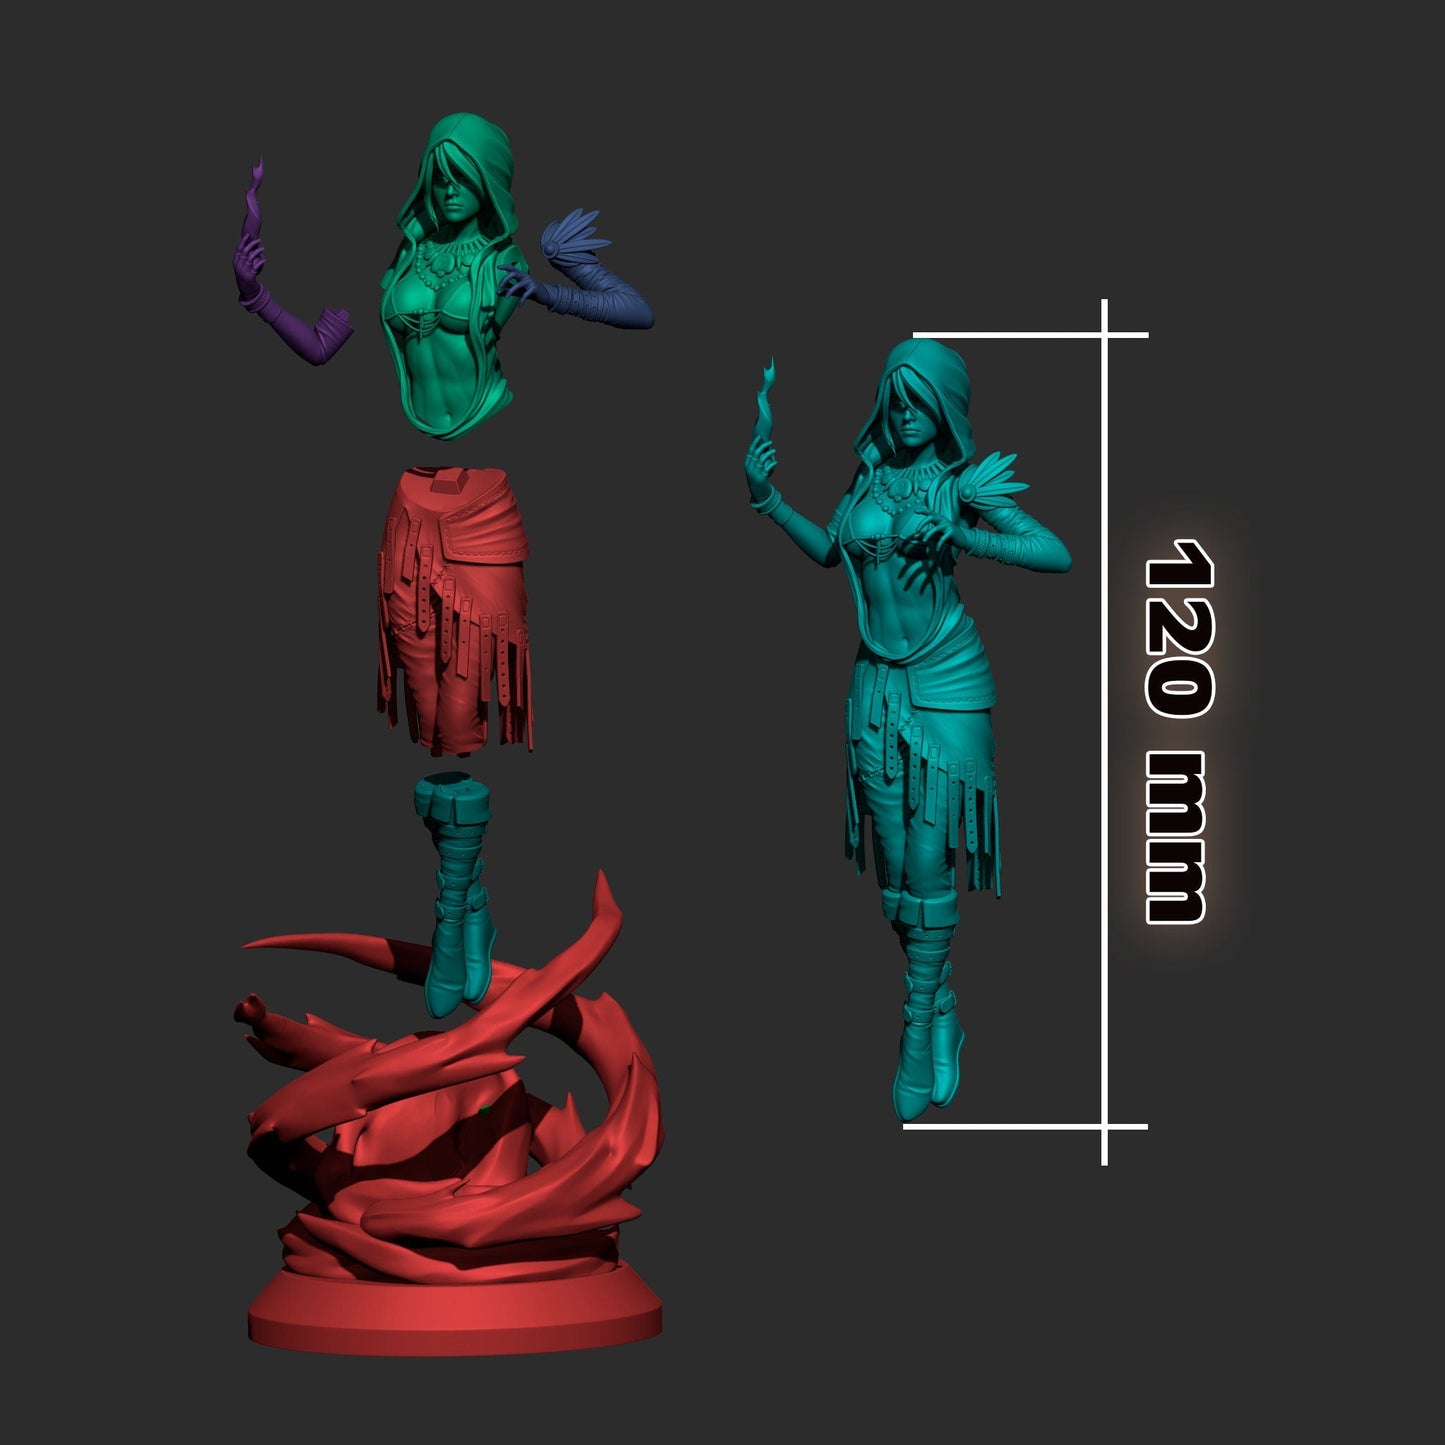 Morrigan 3D printed miniatures figurines collectibles and scale models UNPAINTED Fun Art by h3LL creator